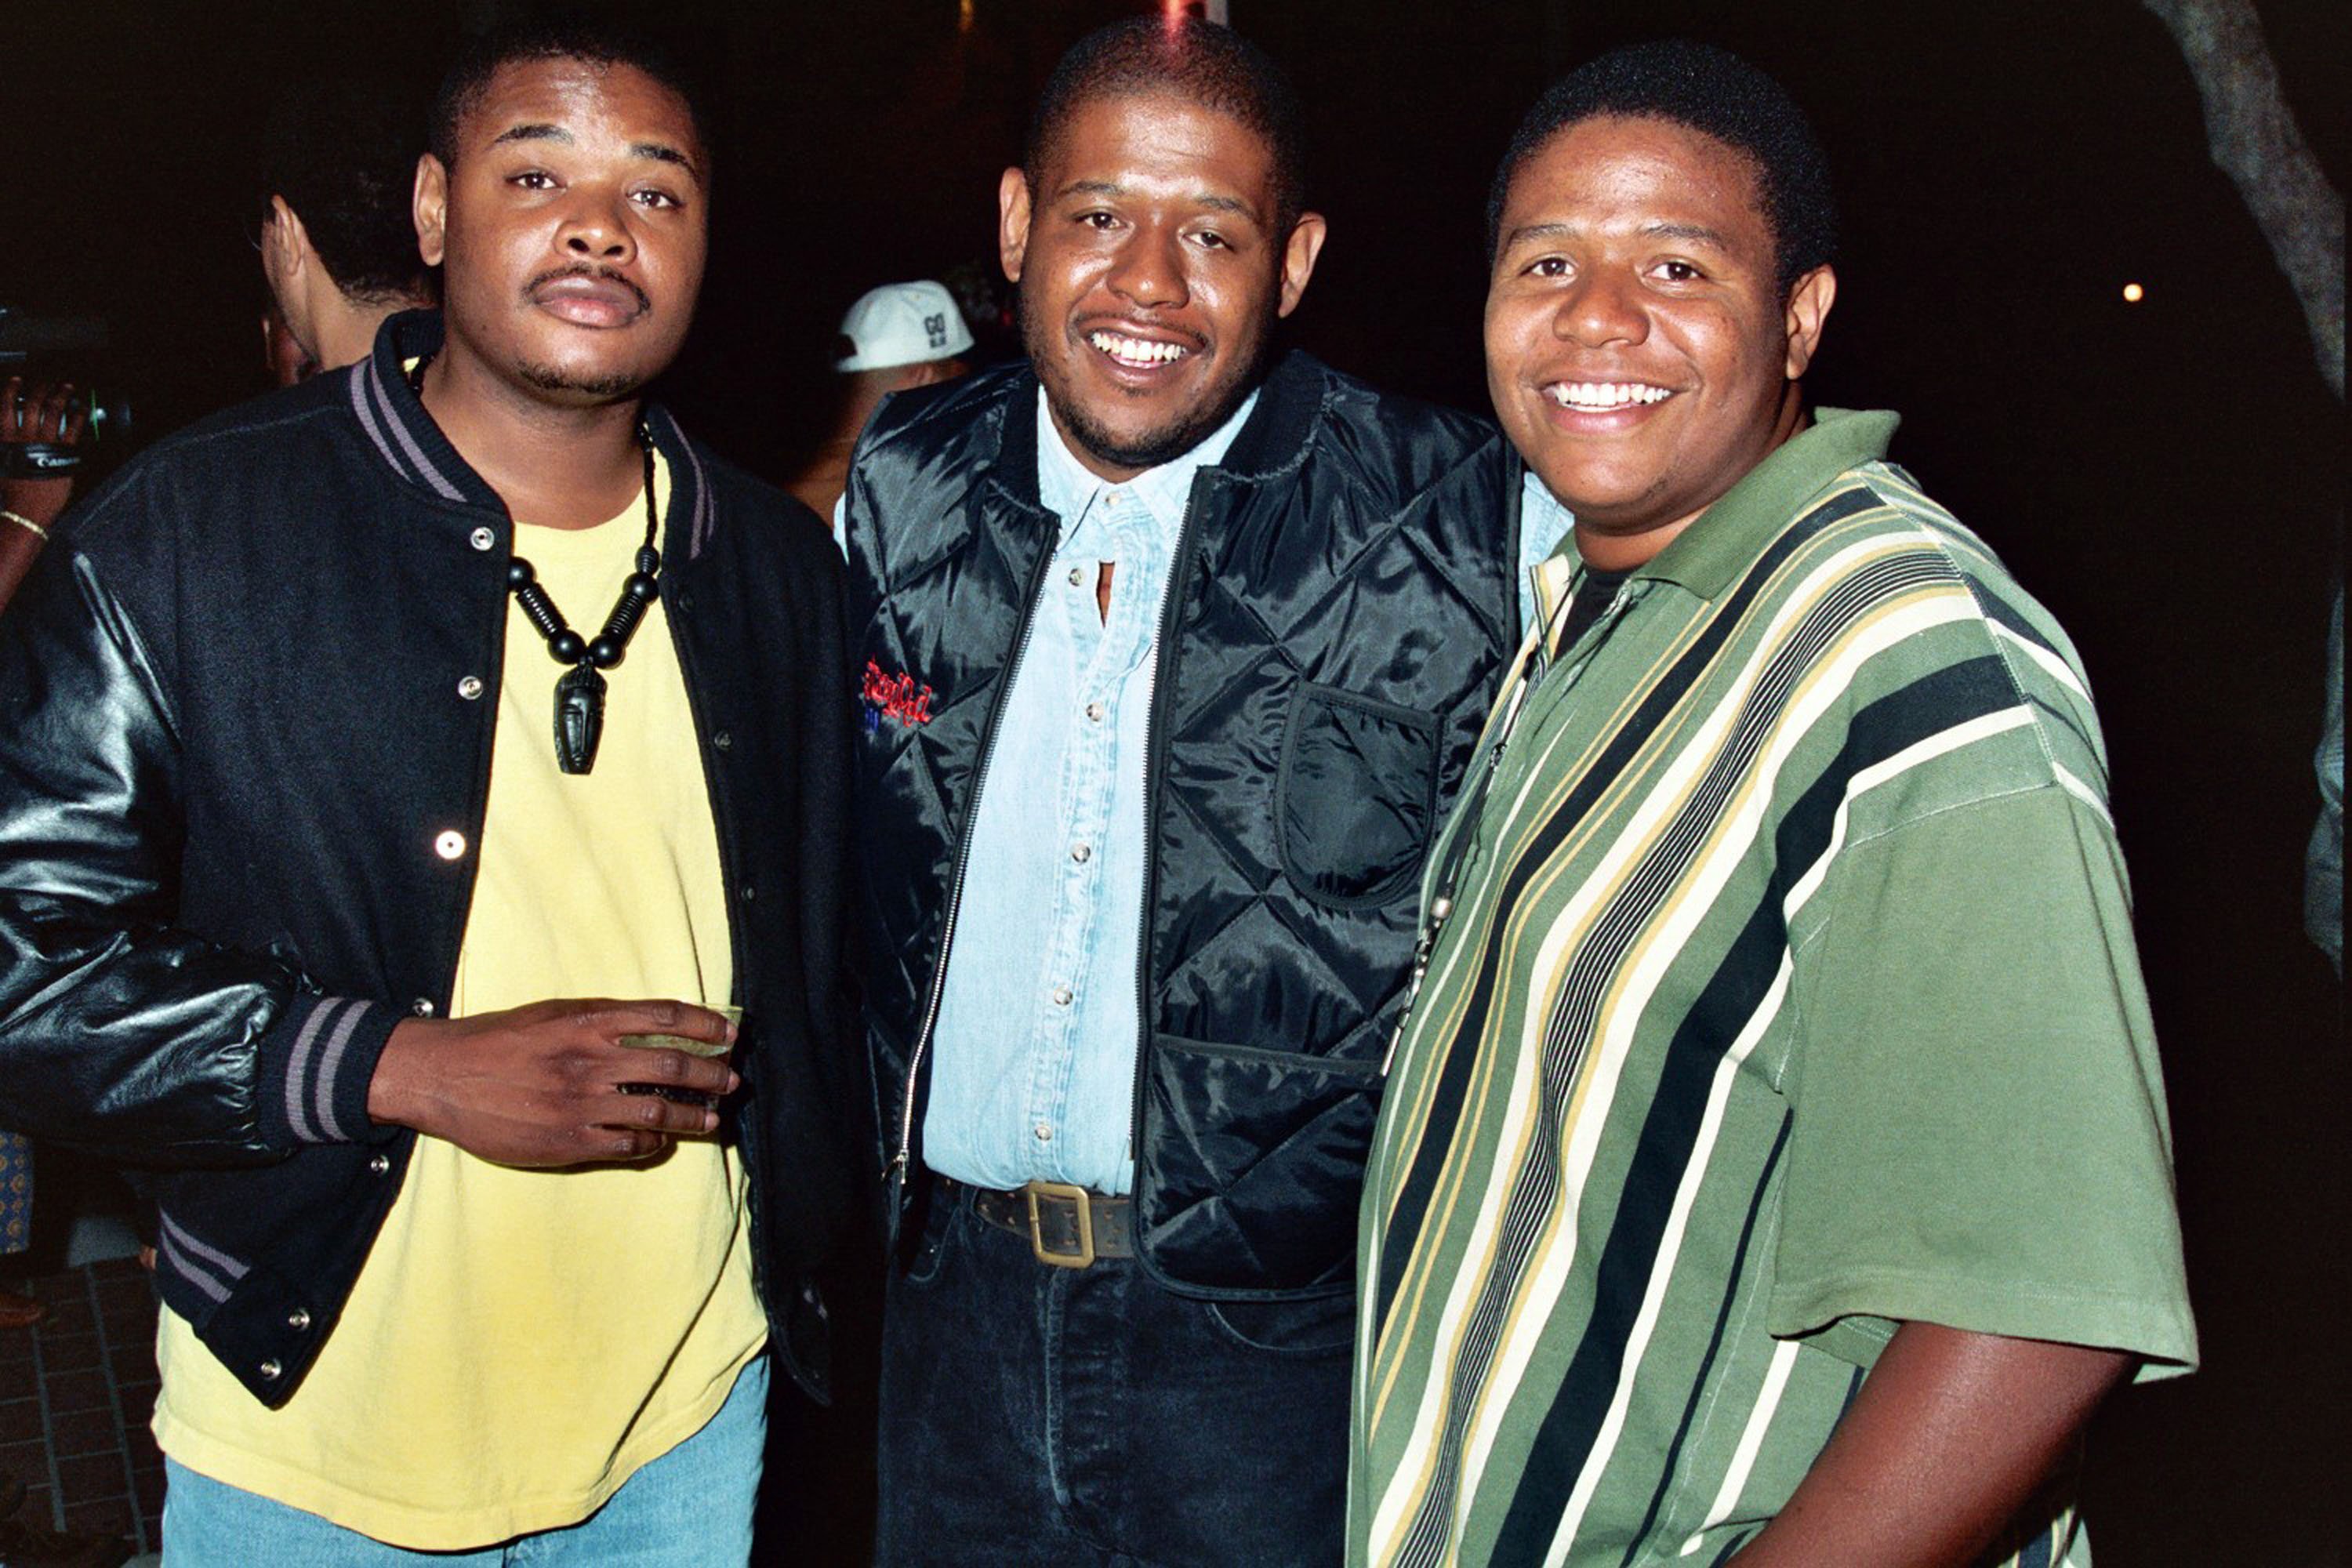 Kenn, Forest, and Damon Whitaker pose for a photo at HBO's screening of "Strapped" on September 2, 1993 | Source: Getty Images